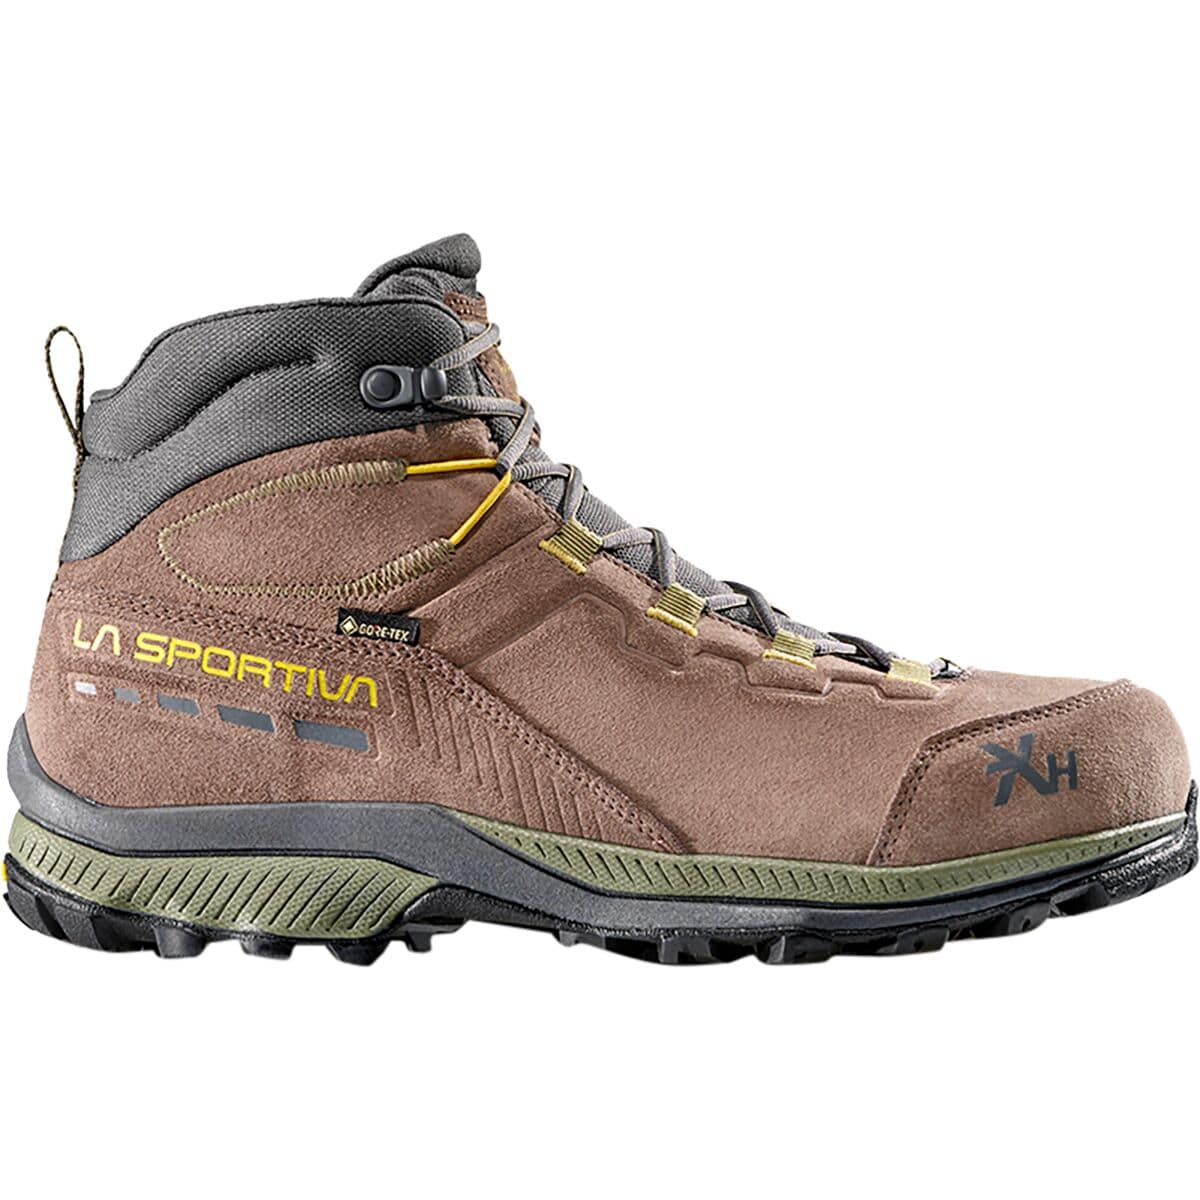 TX Hike Mid Leather GTX Hiking Boot - Men